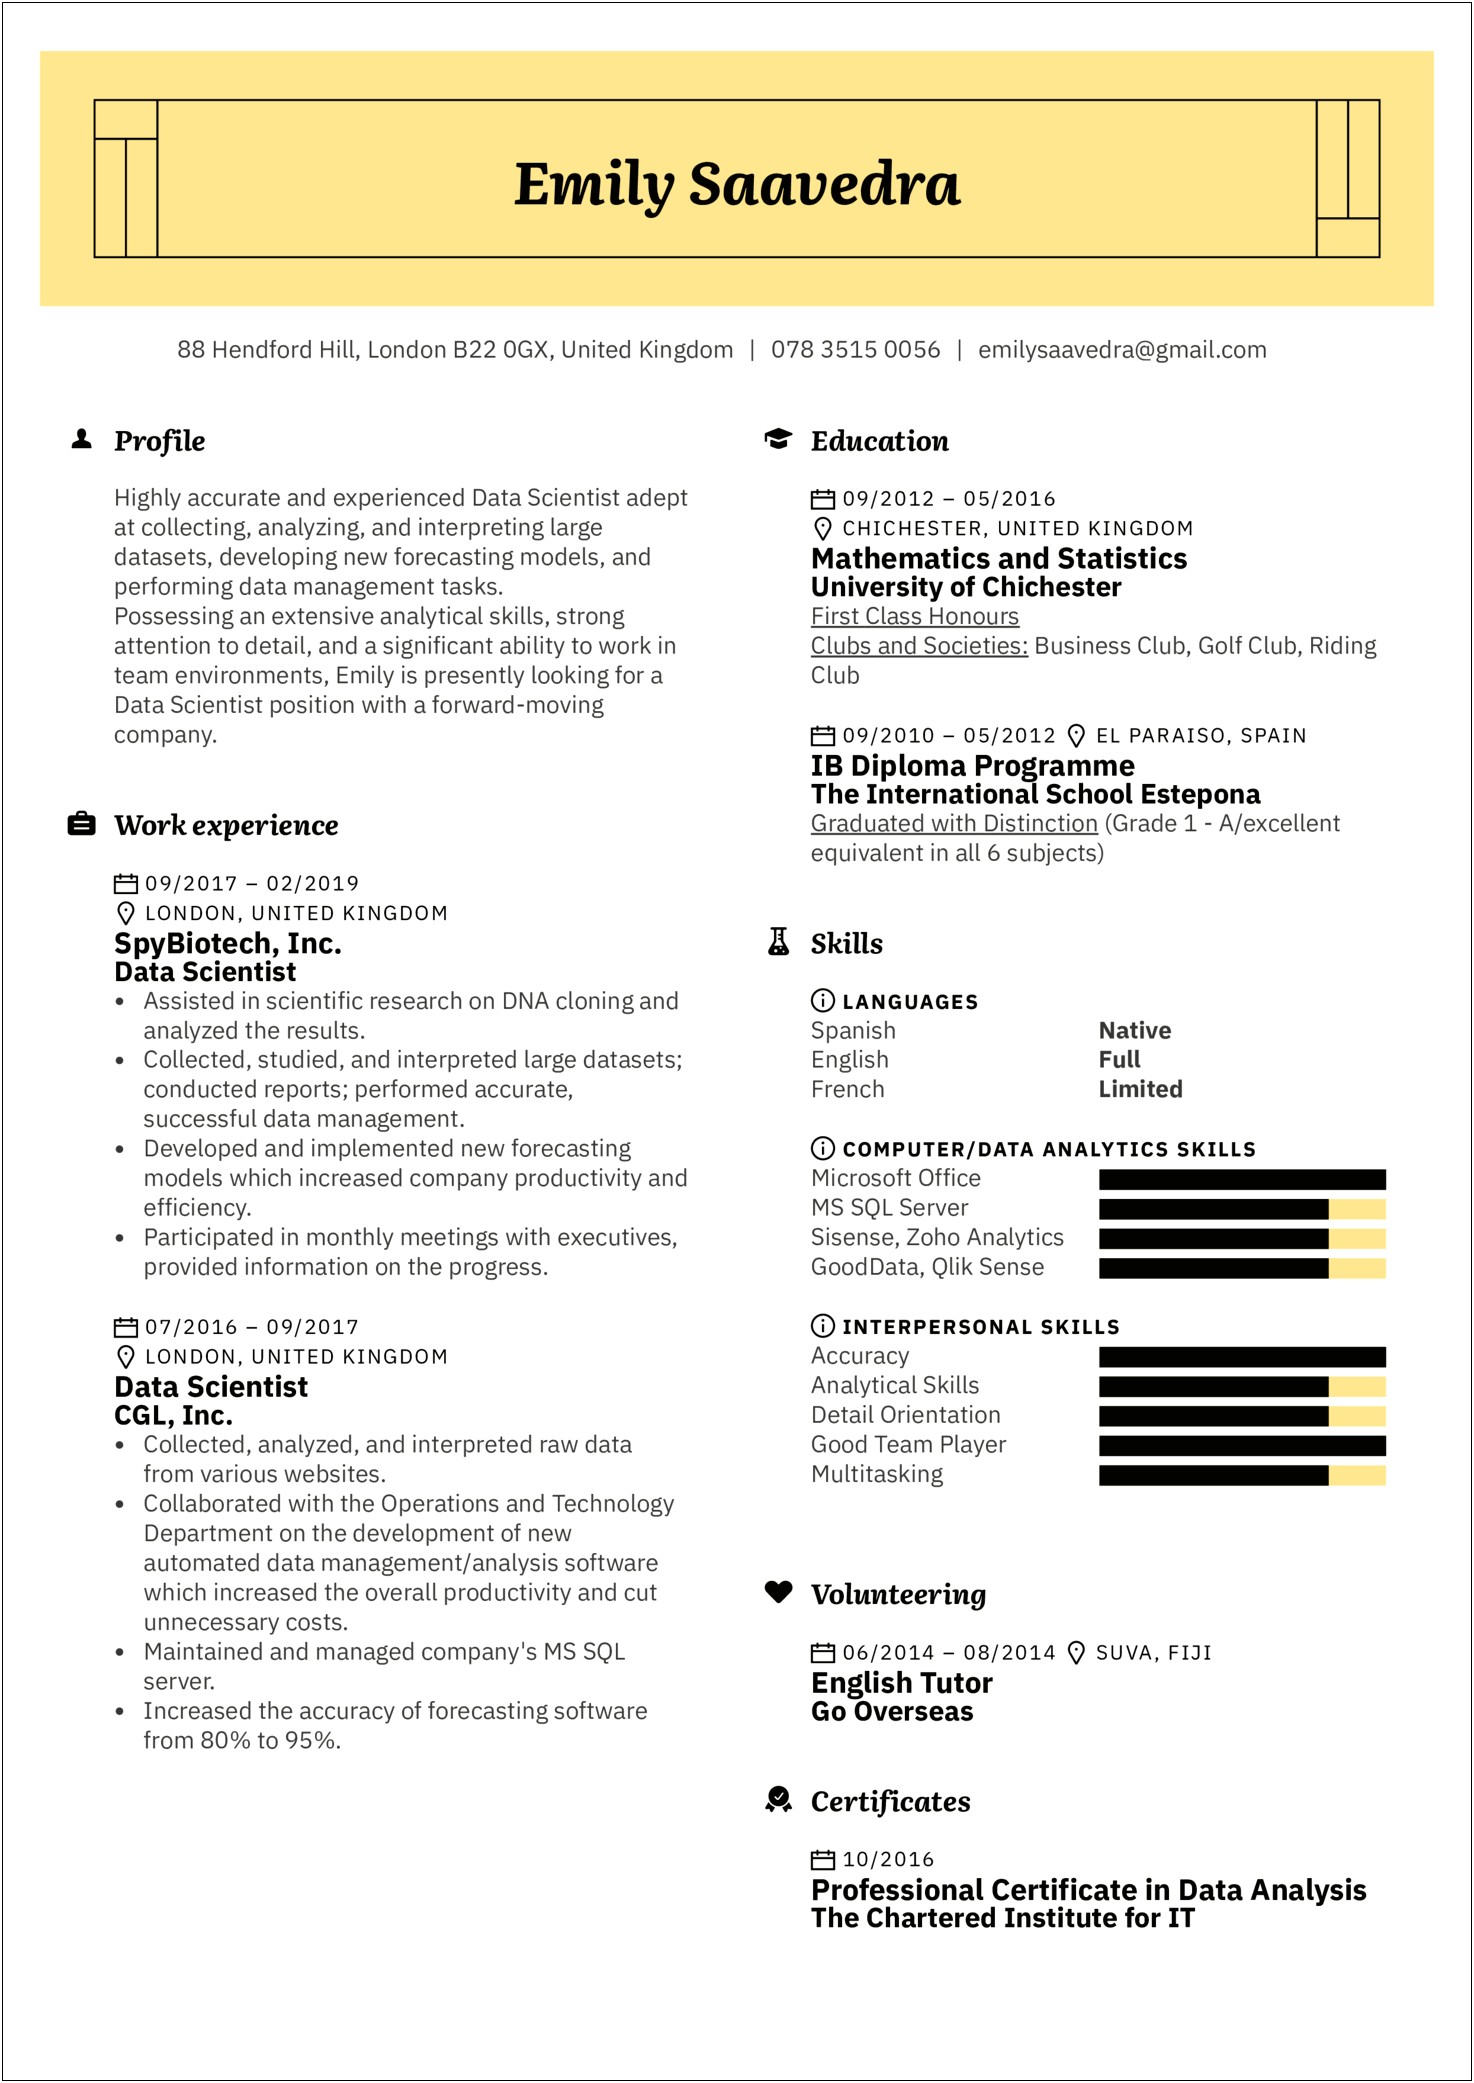 Resume Summary For Entry Level Data Scientist